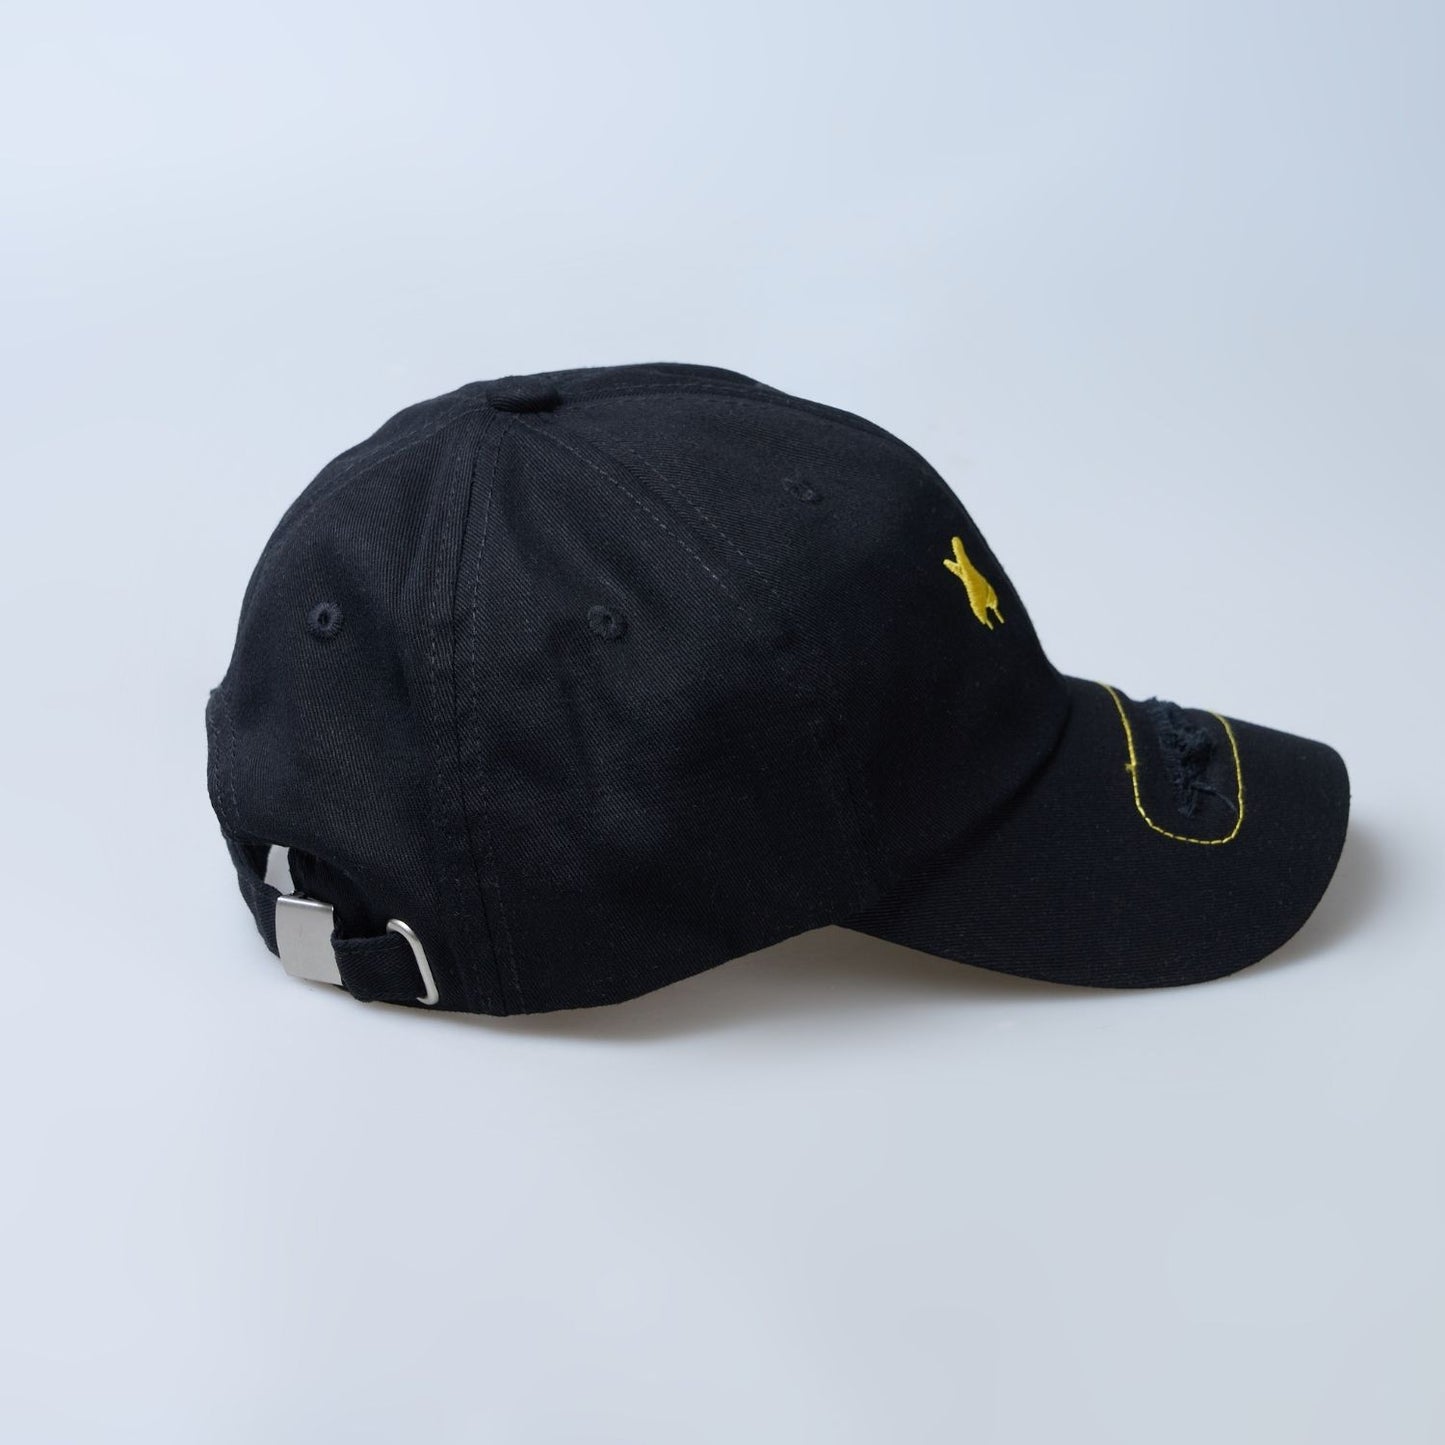 Side view of Black colored solid cap for men.